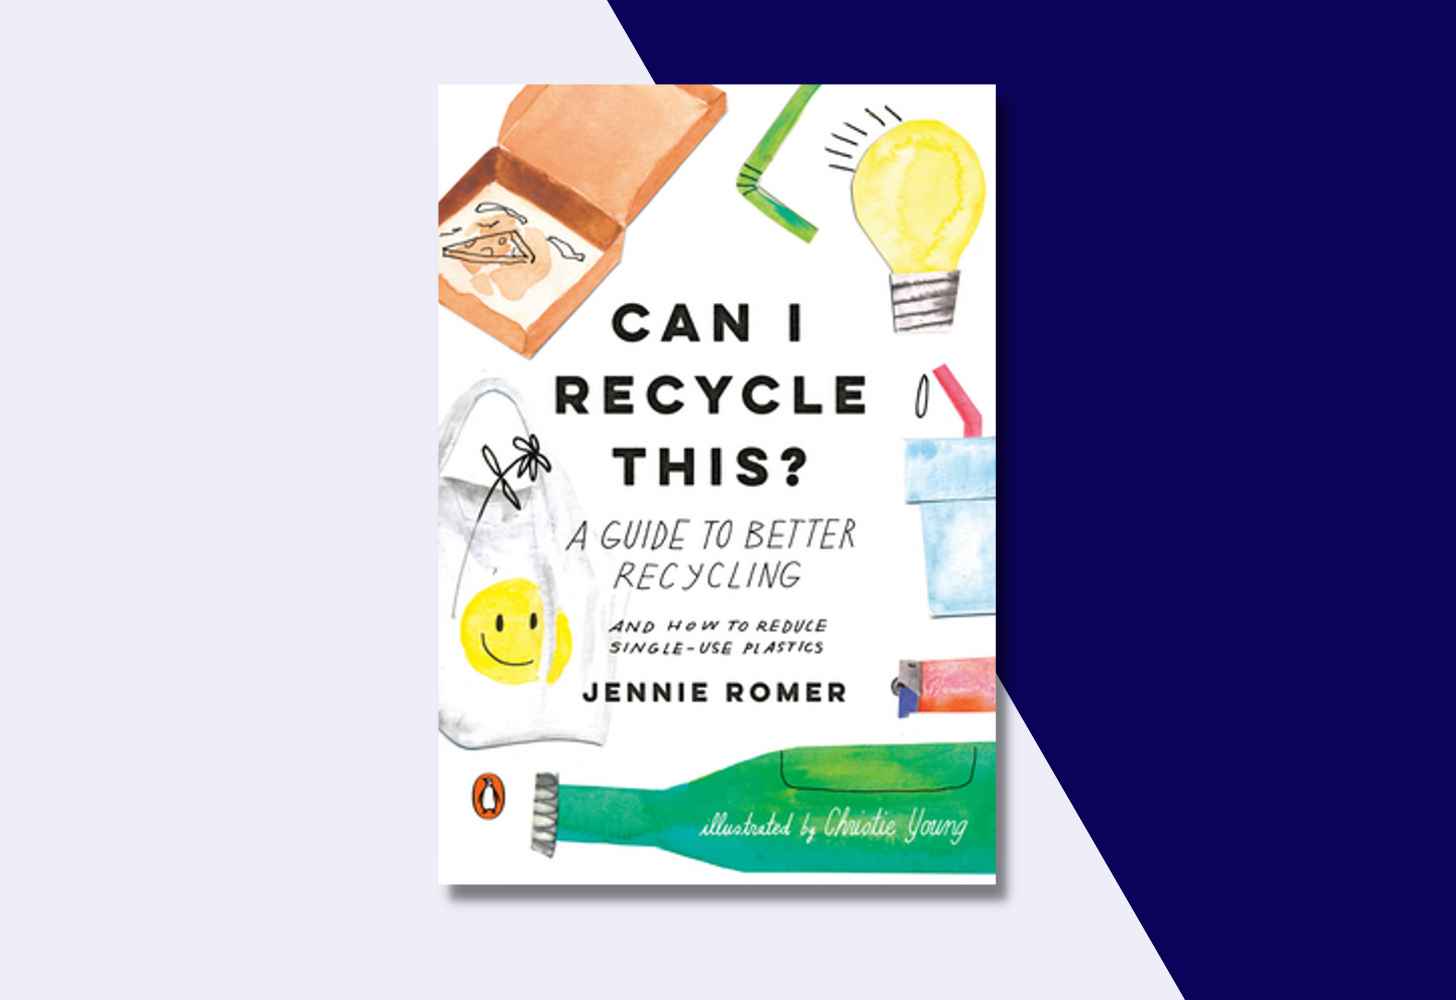 The Cover Of “Can I Recycle This? A Guide To Better Recycling And How to Reduce Single-Use Plastics” by Jennie Romer